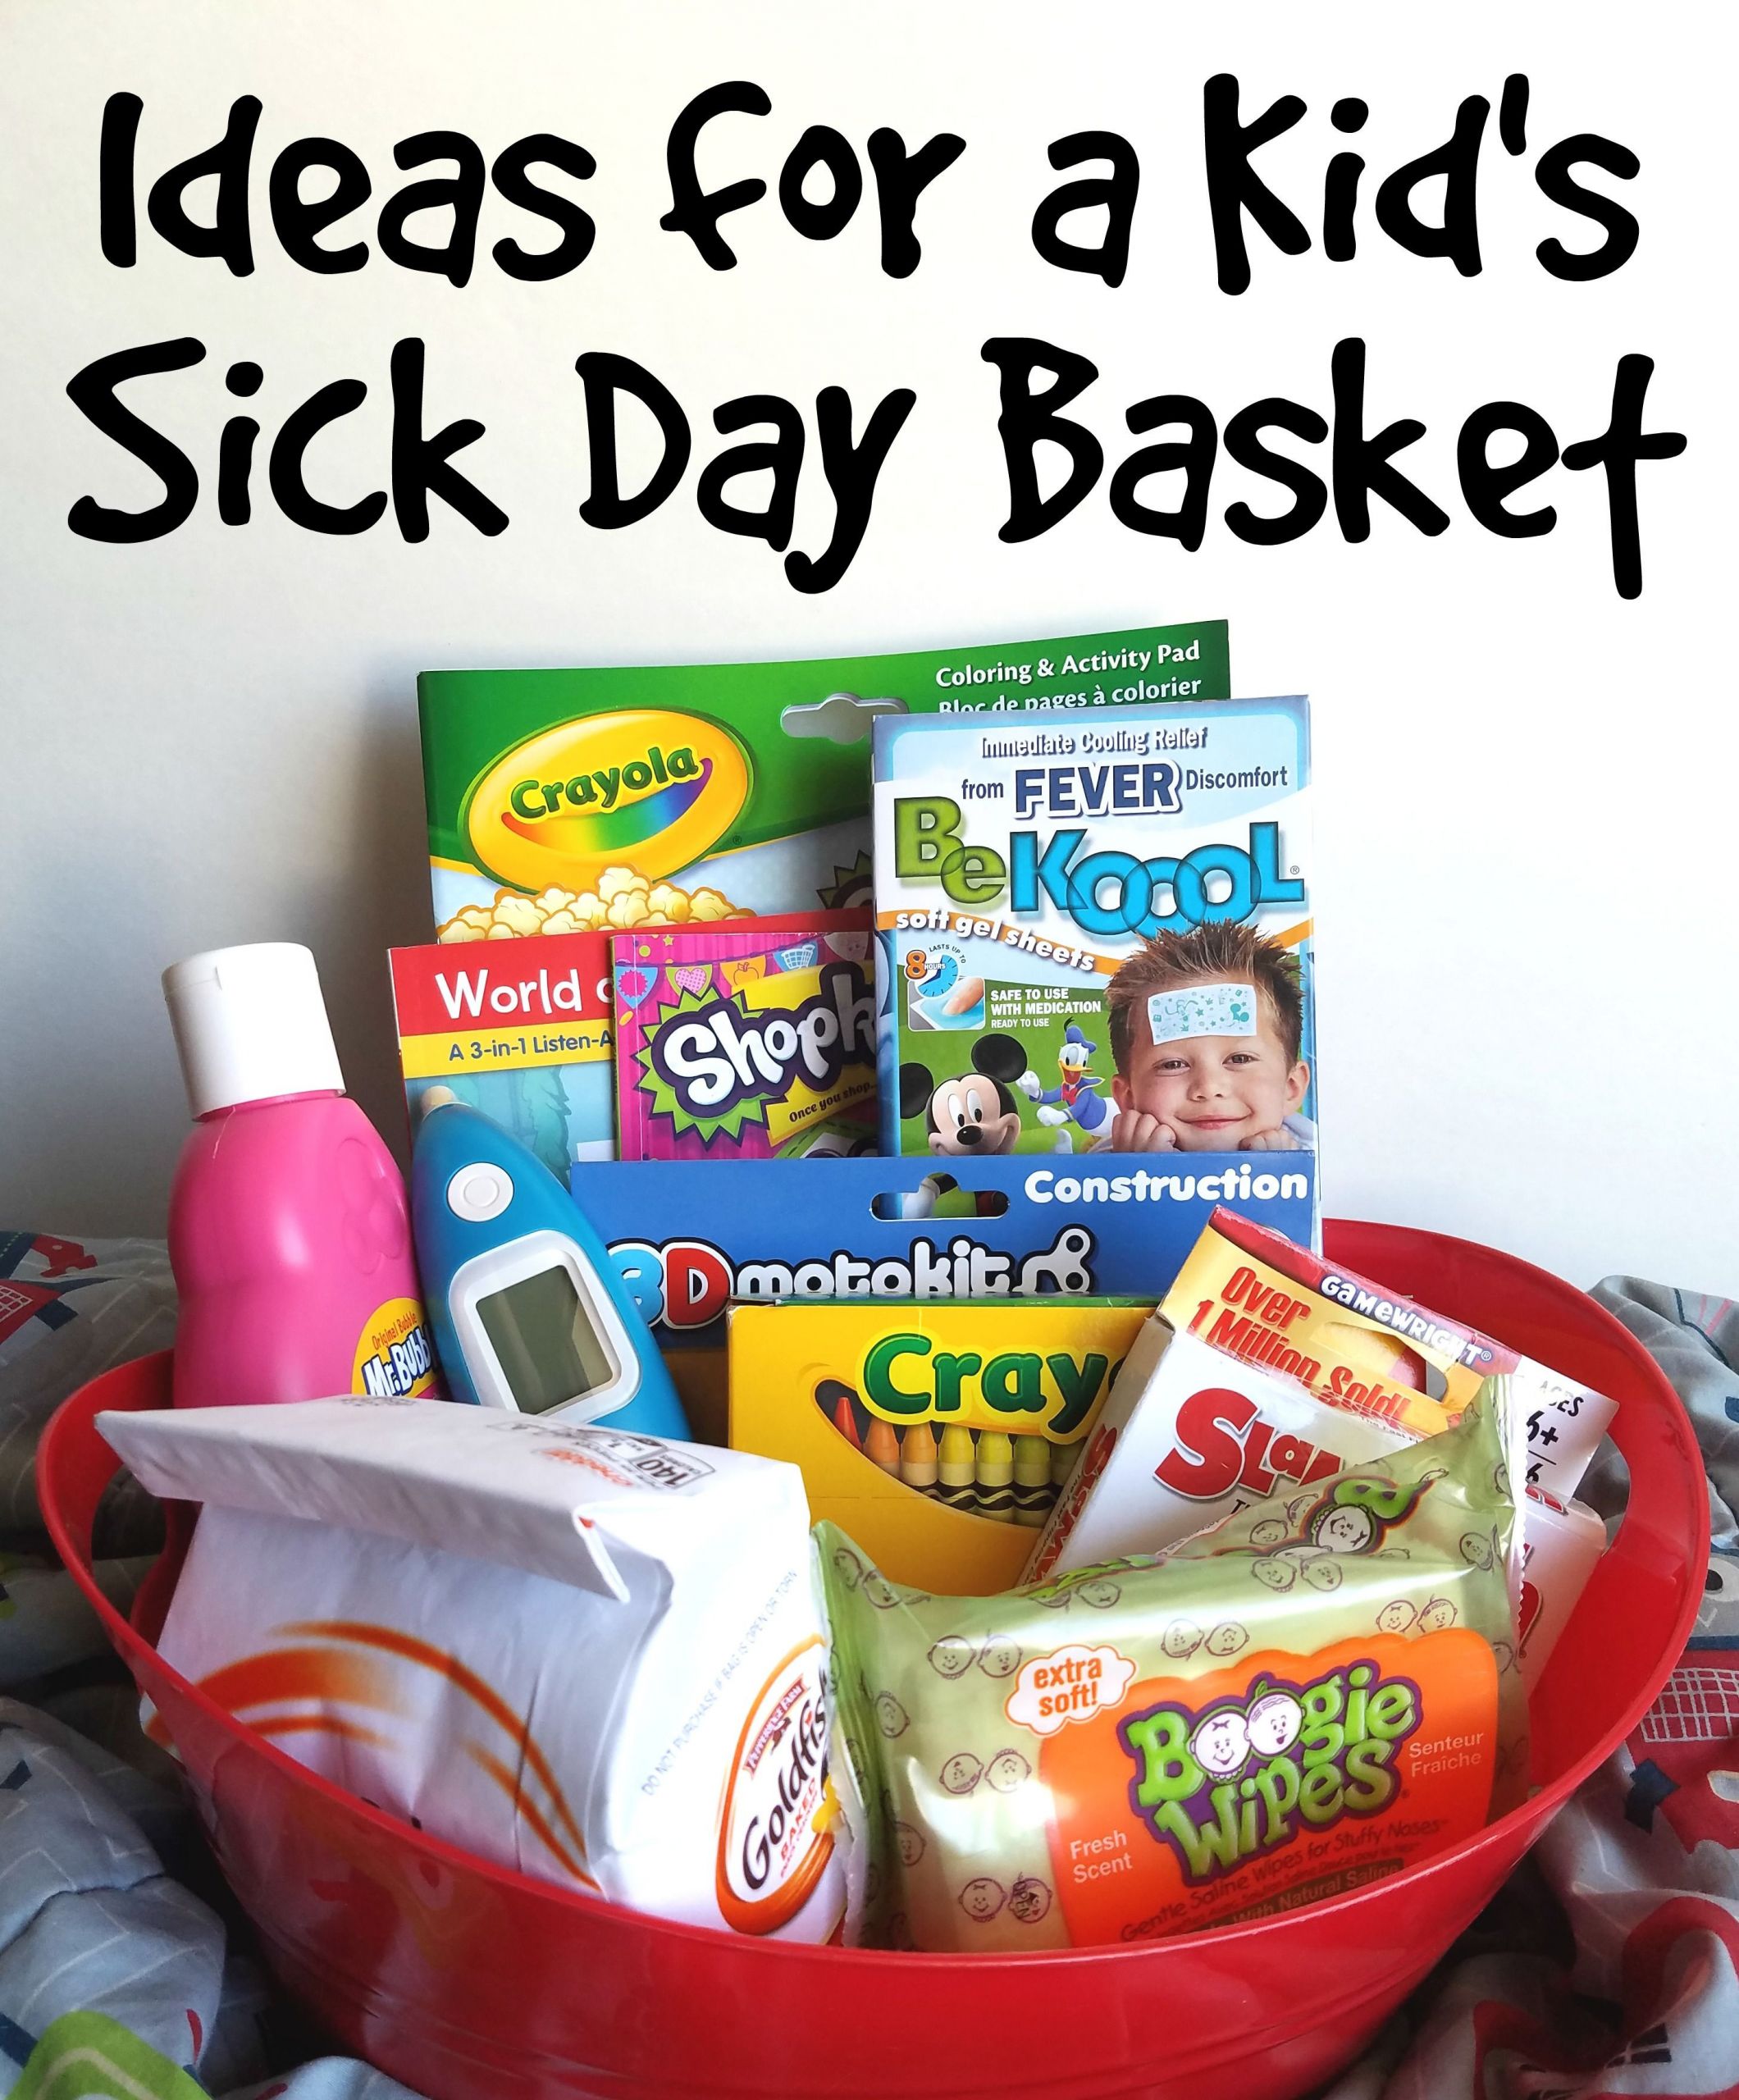 Get Well Gift For Children
 Sick Day Basket For Kids